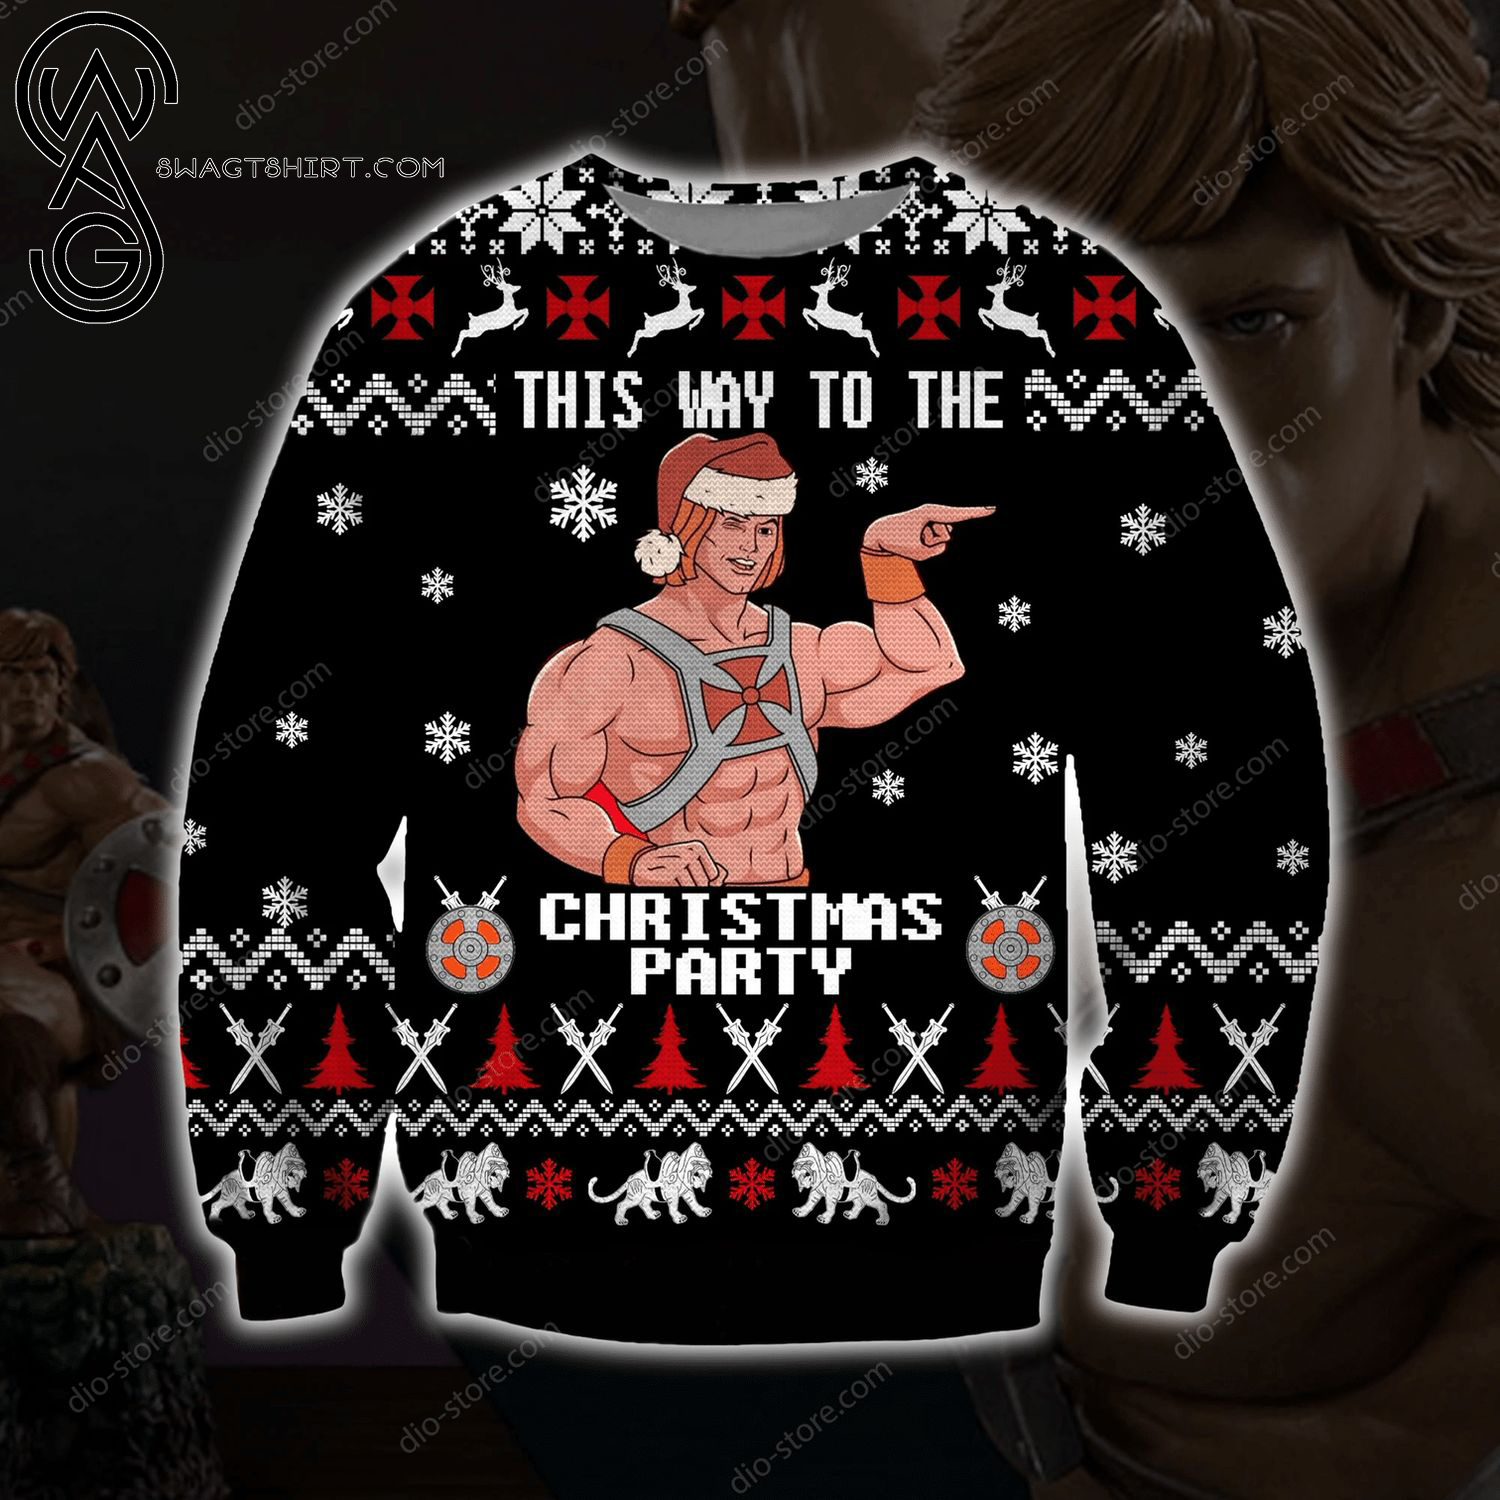 He-Man This Way To The Christmas Party Ugly Christmas Sweater